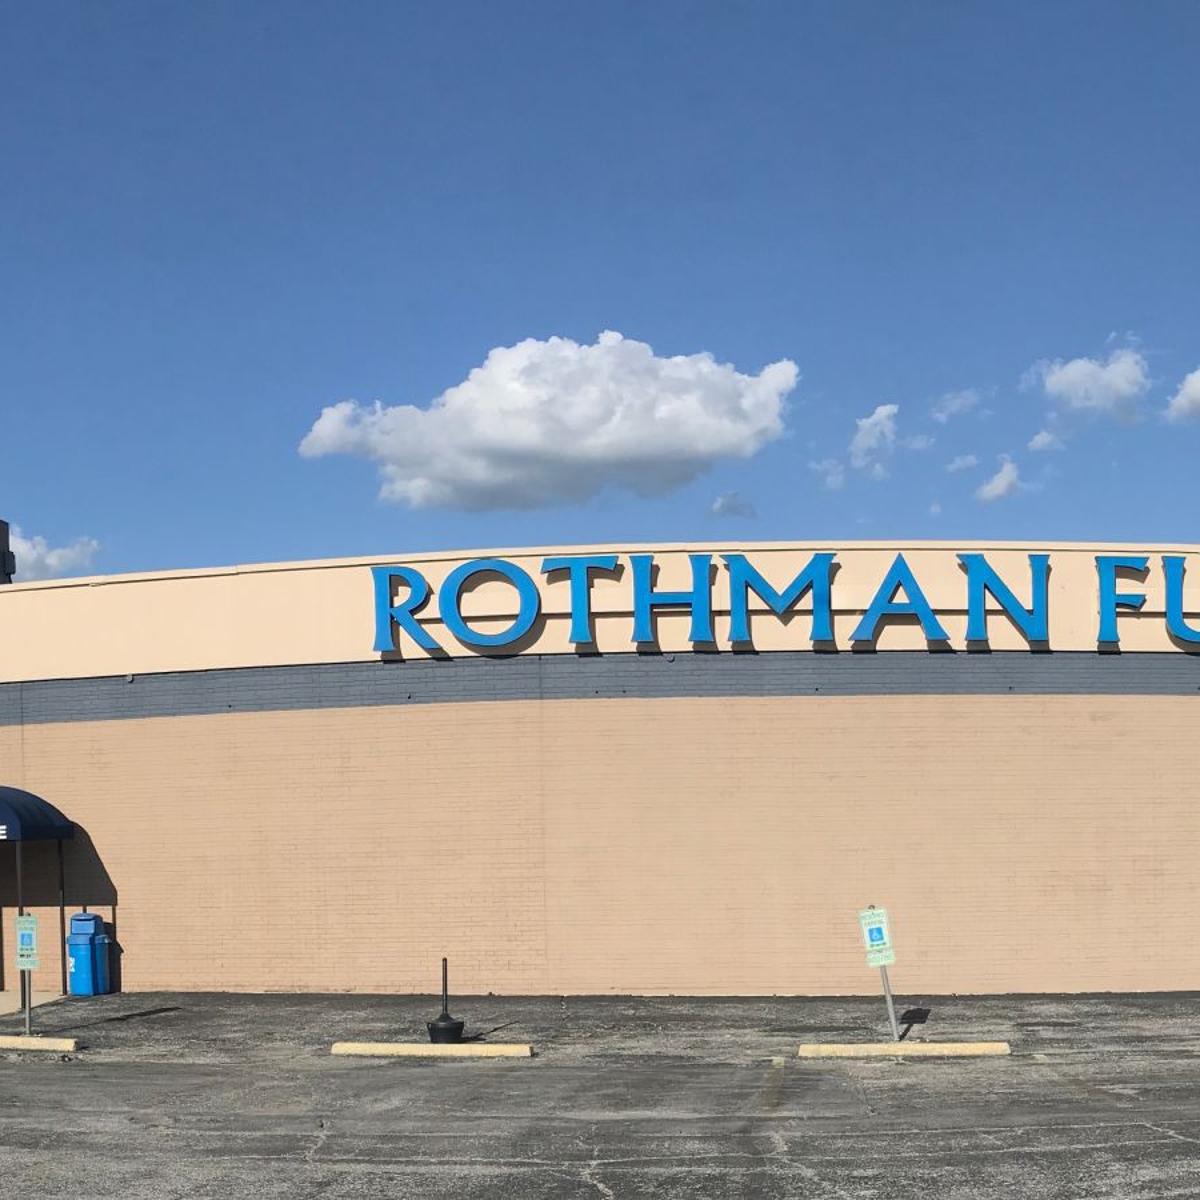 Rothman Furniture Closing All Stores After 90 Years Local